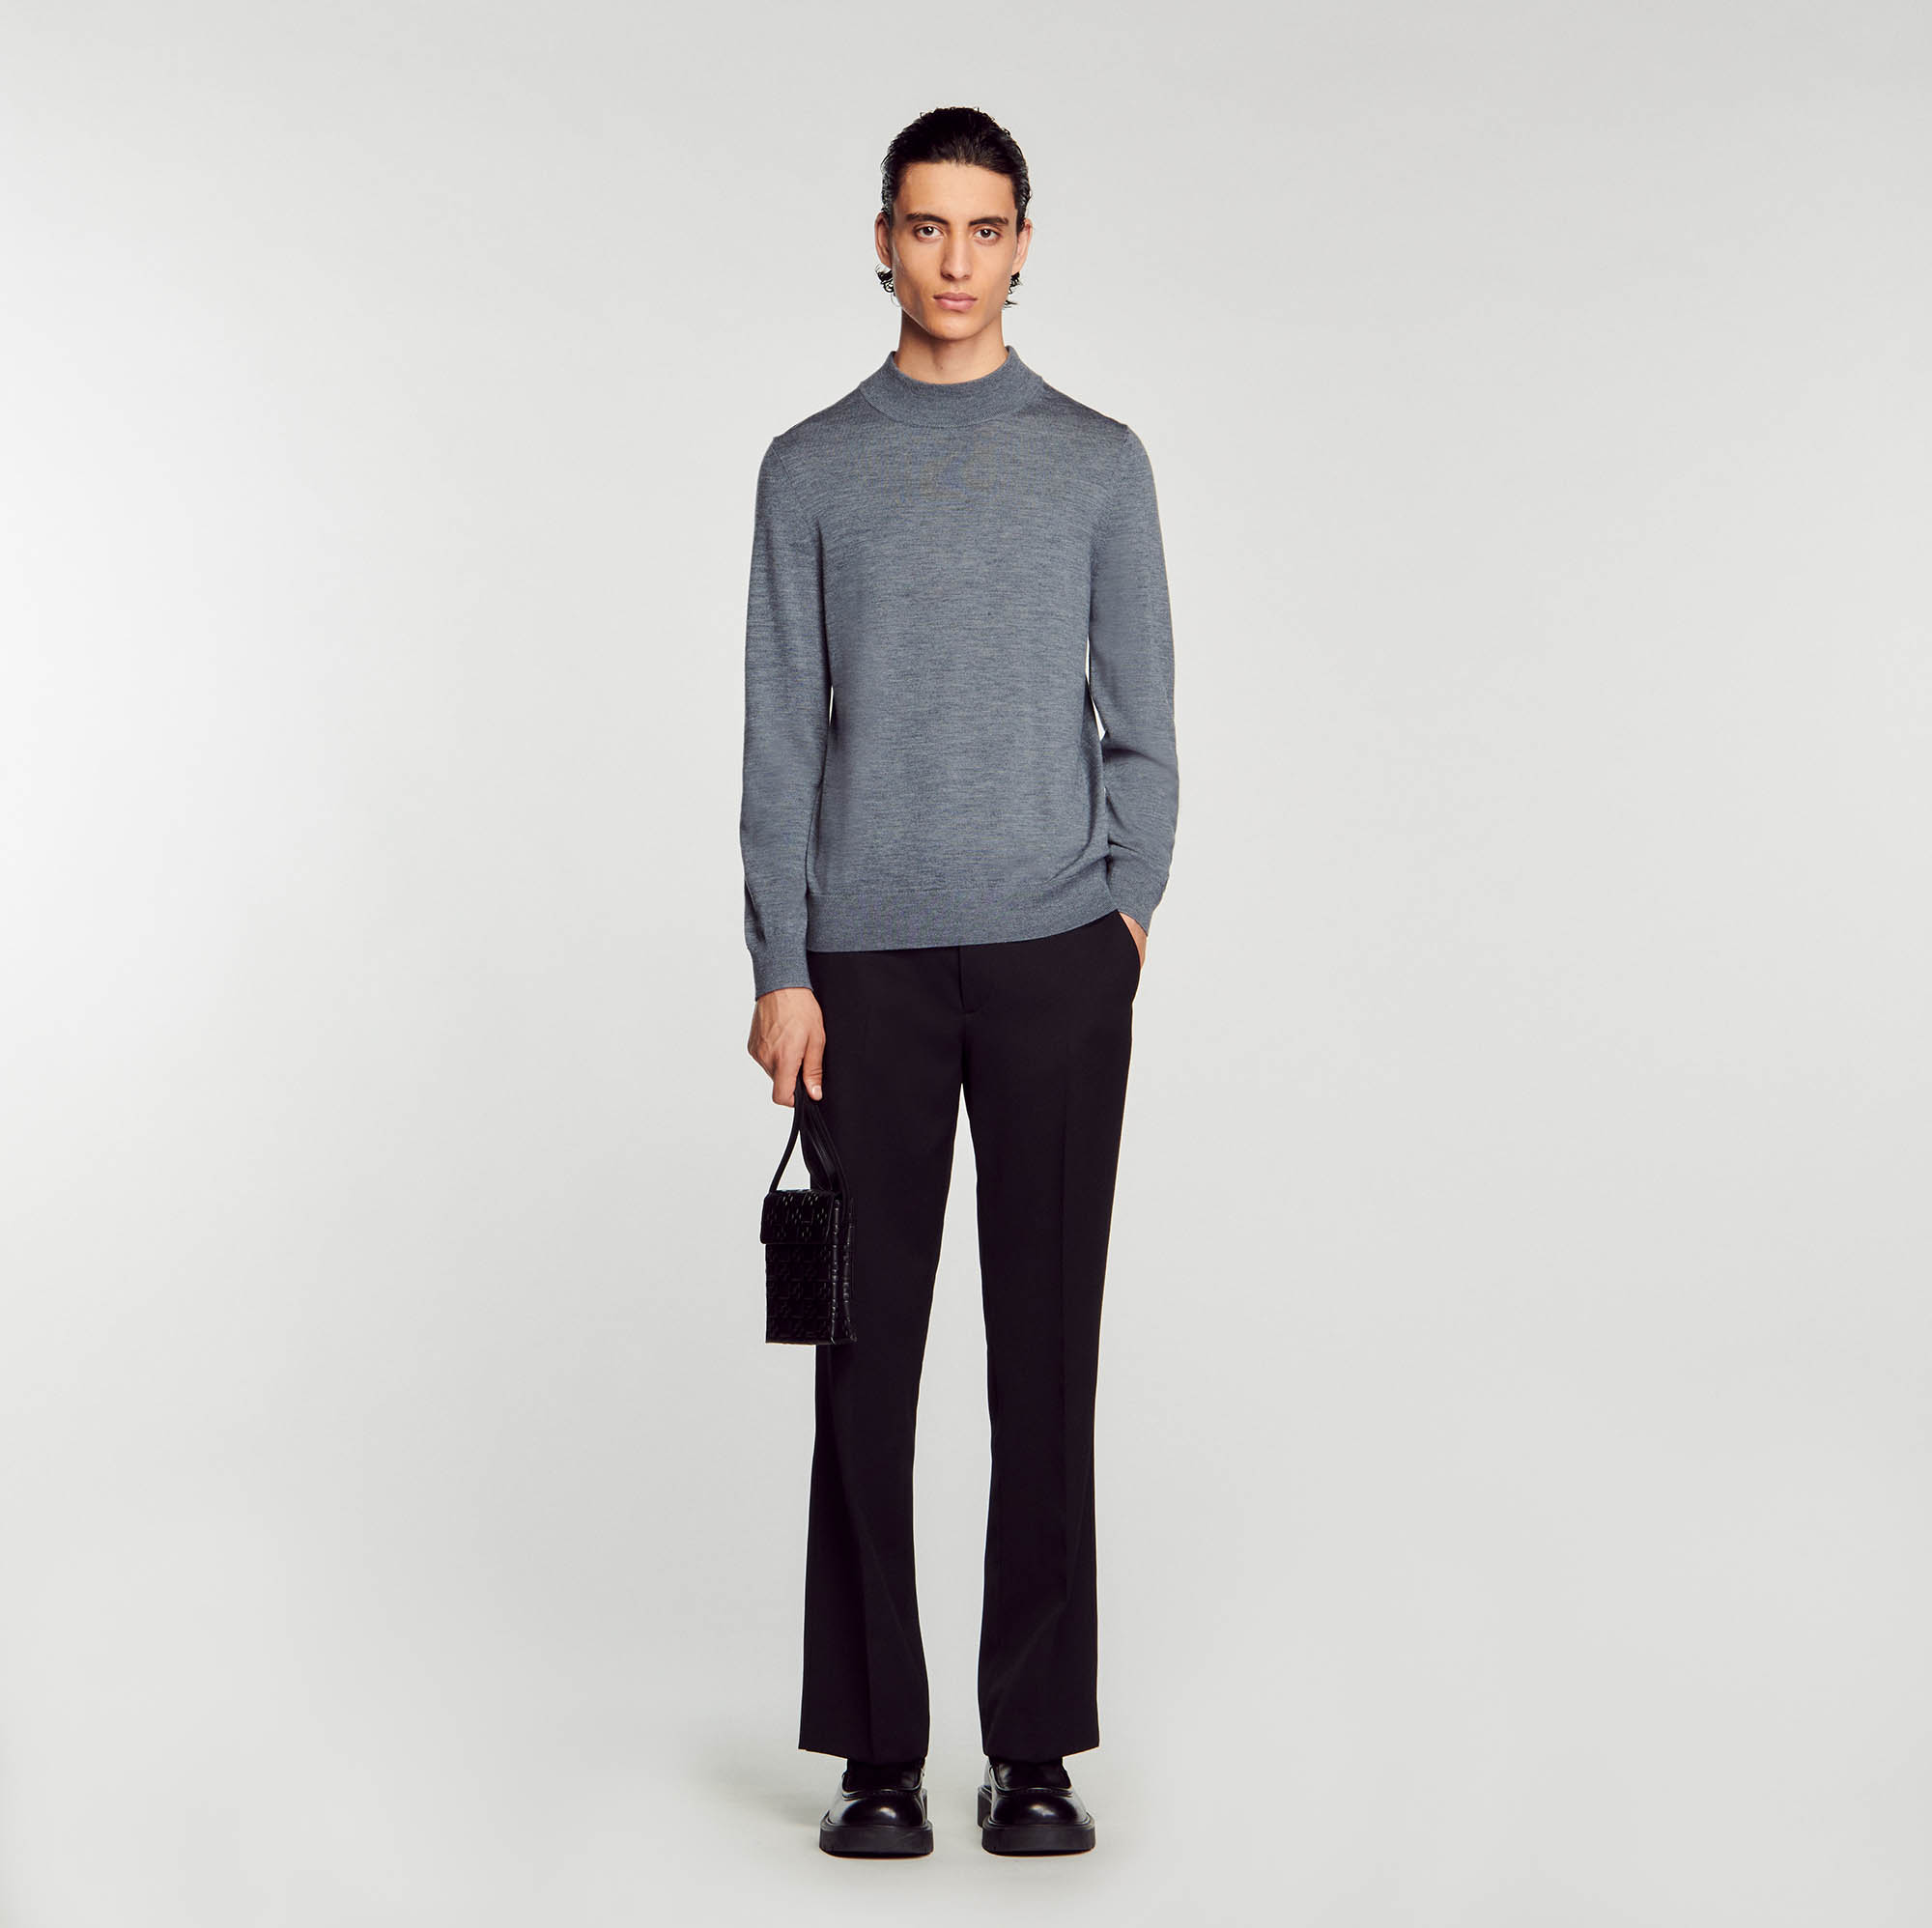 Sandro wool Collar: Wool sweater with long sleeves and a funnel neck